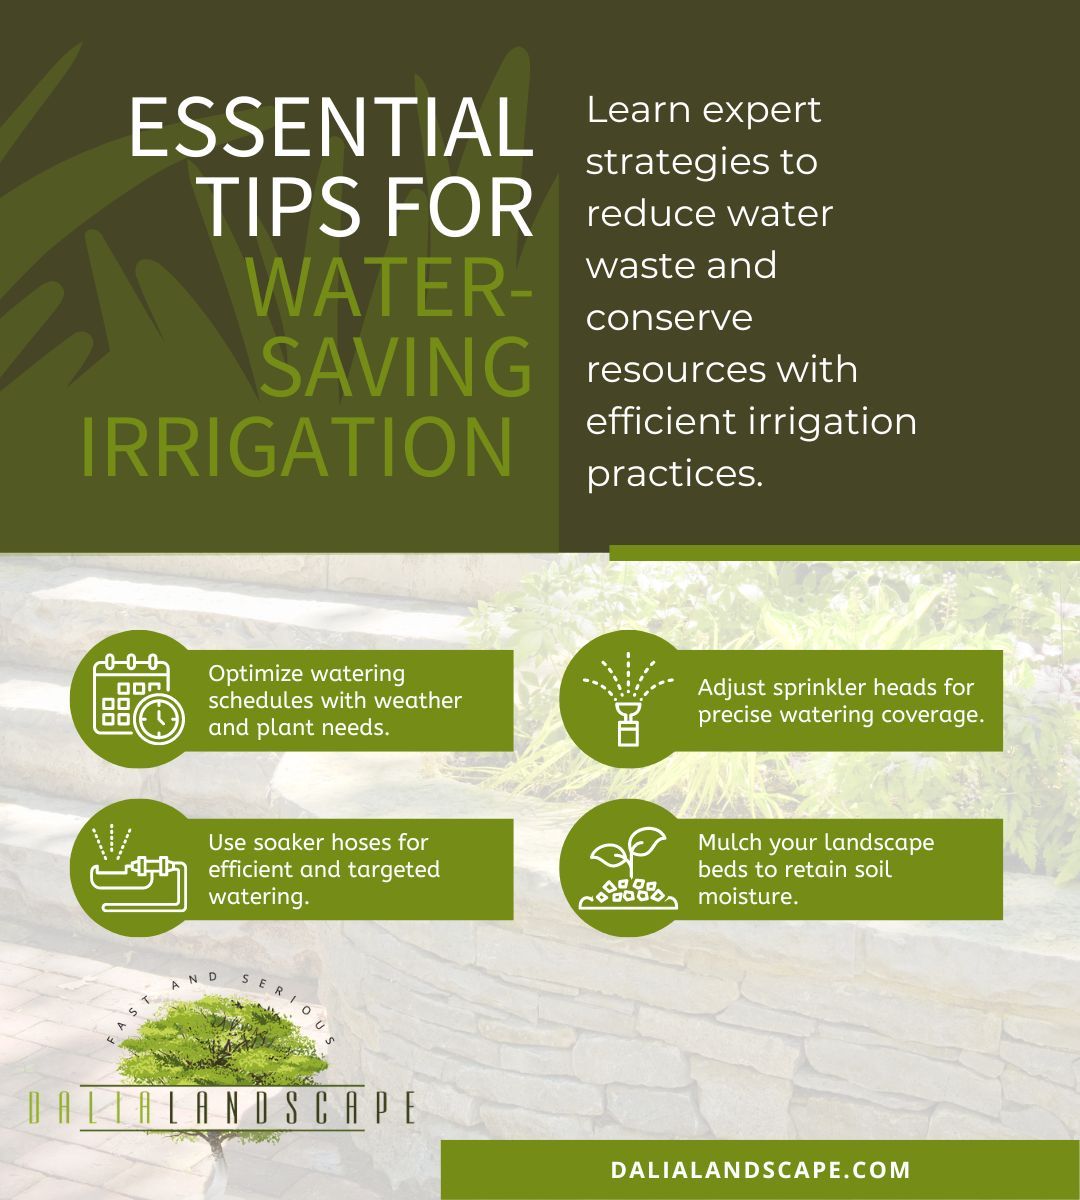 M38437 - Infographic - Essential Tips for Water-Saving Irrigation.jpg